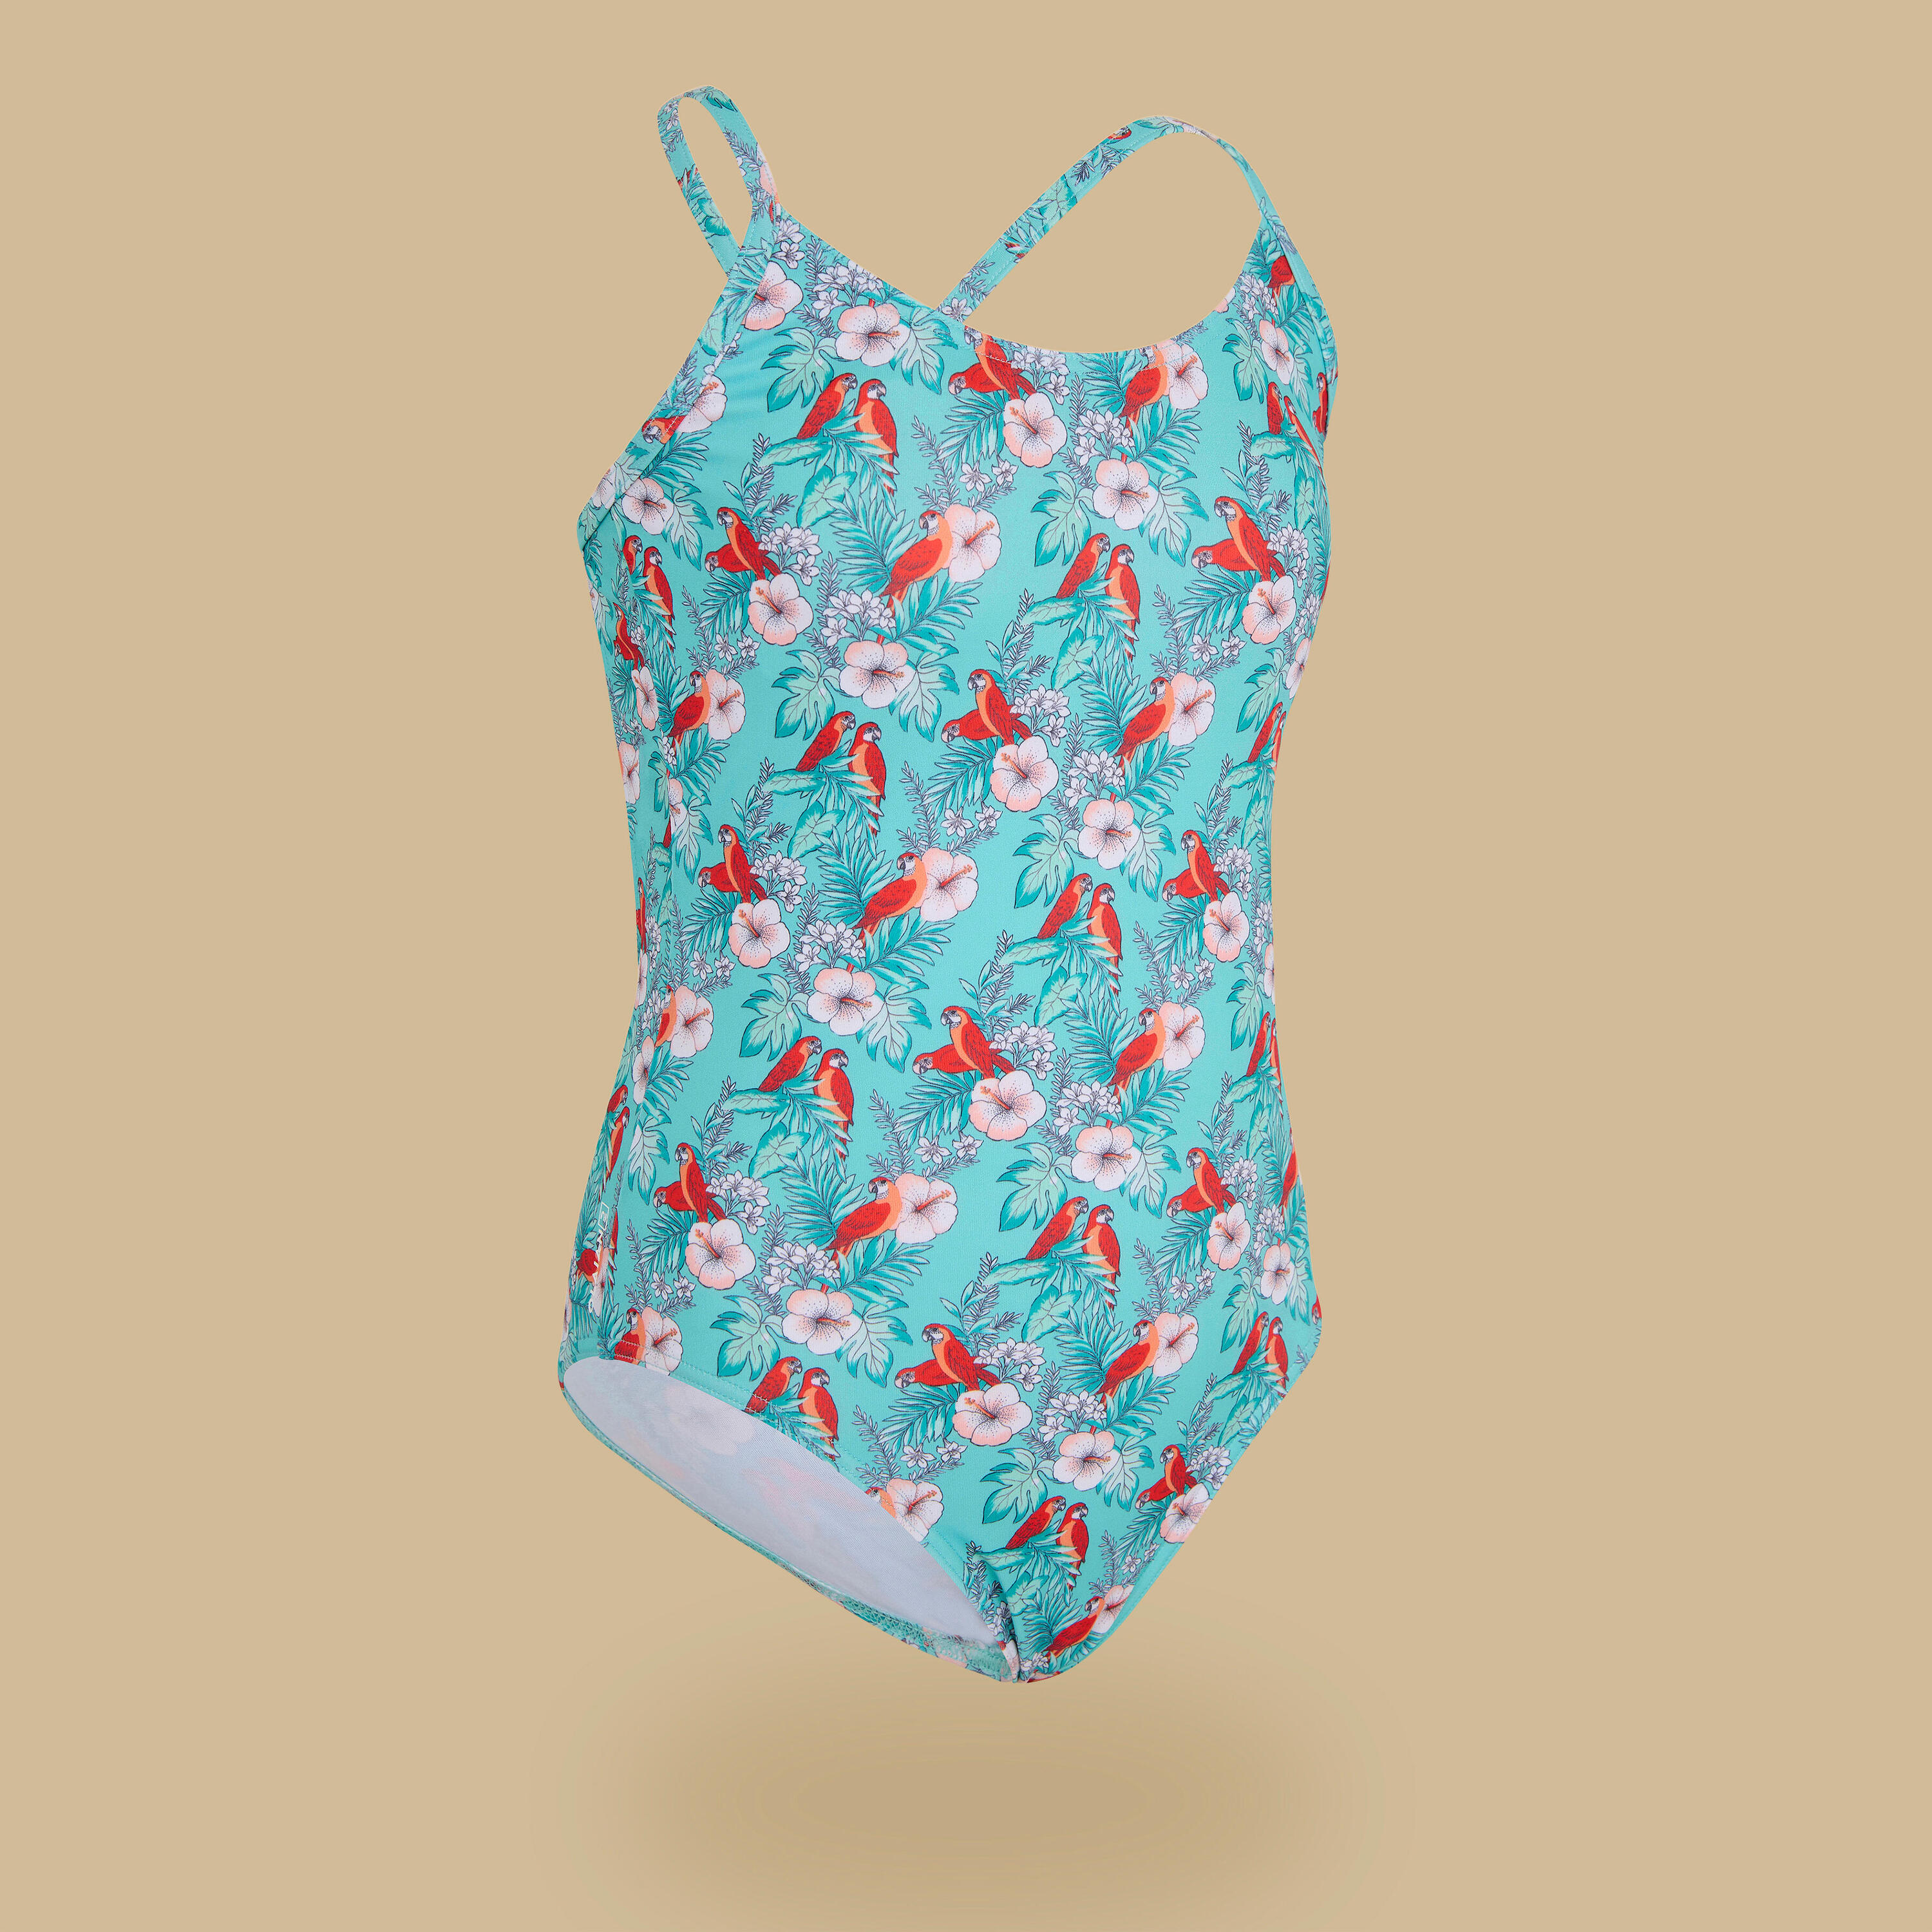 GIRL'S ONE-PIECE SWIMSUIT 100 COCO TURQUOISE 1/7